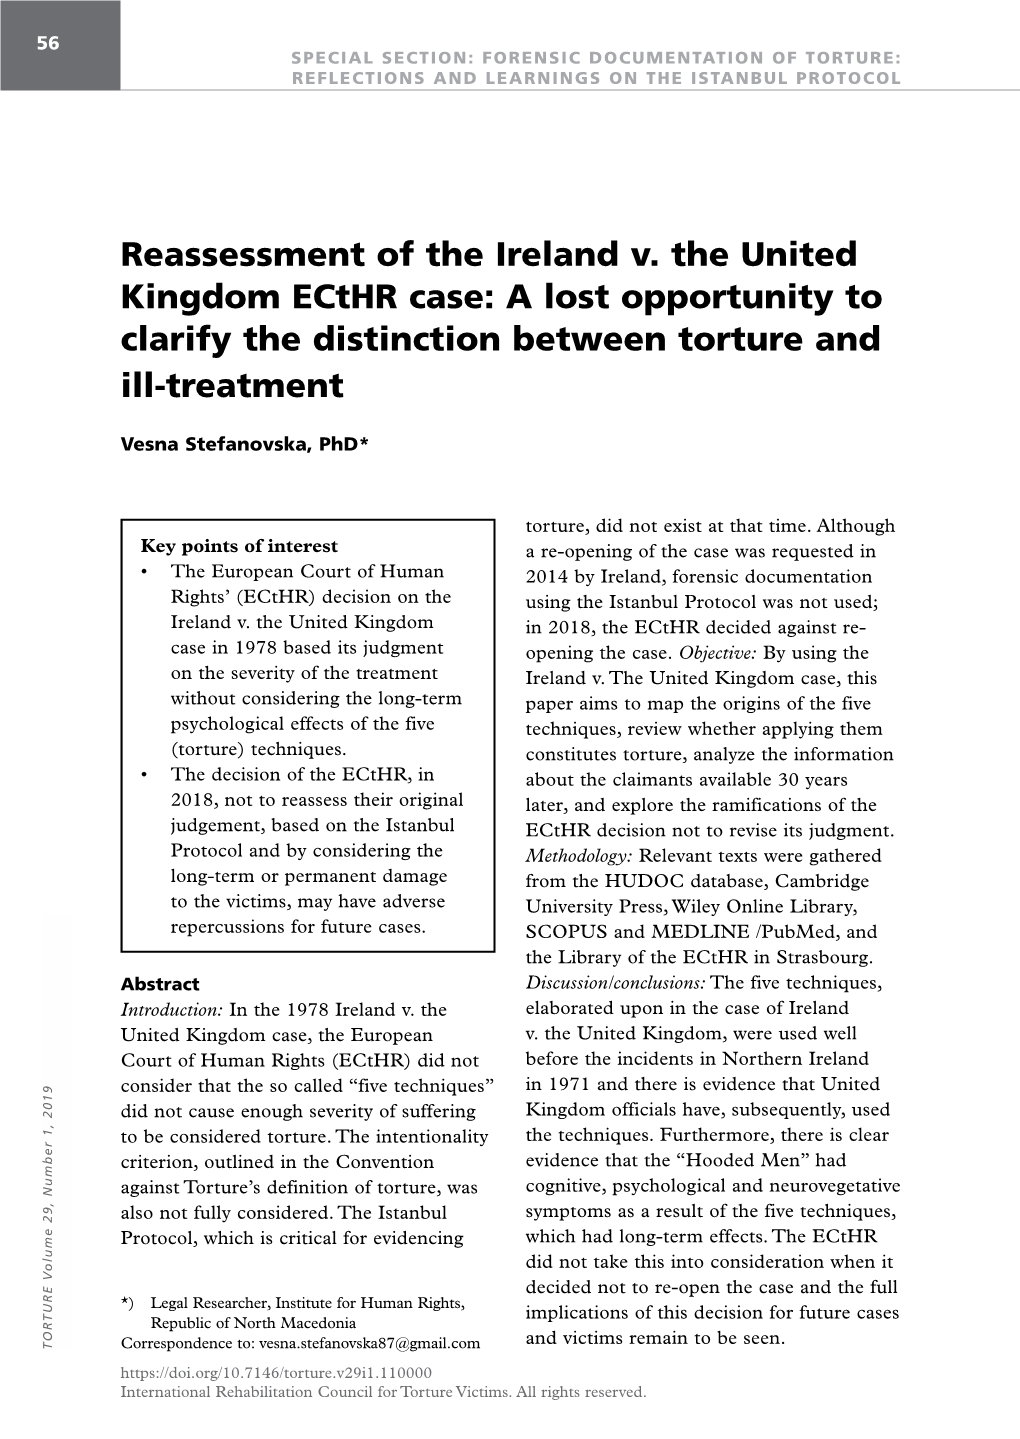 Reassessment of the Ireland V. the United Kingdom Ecthr Case: a Lost Opportunity to Clarify the Distinction Between Torture and Ill-Treatment